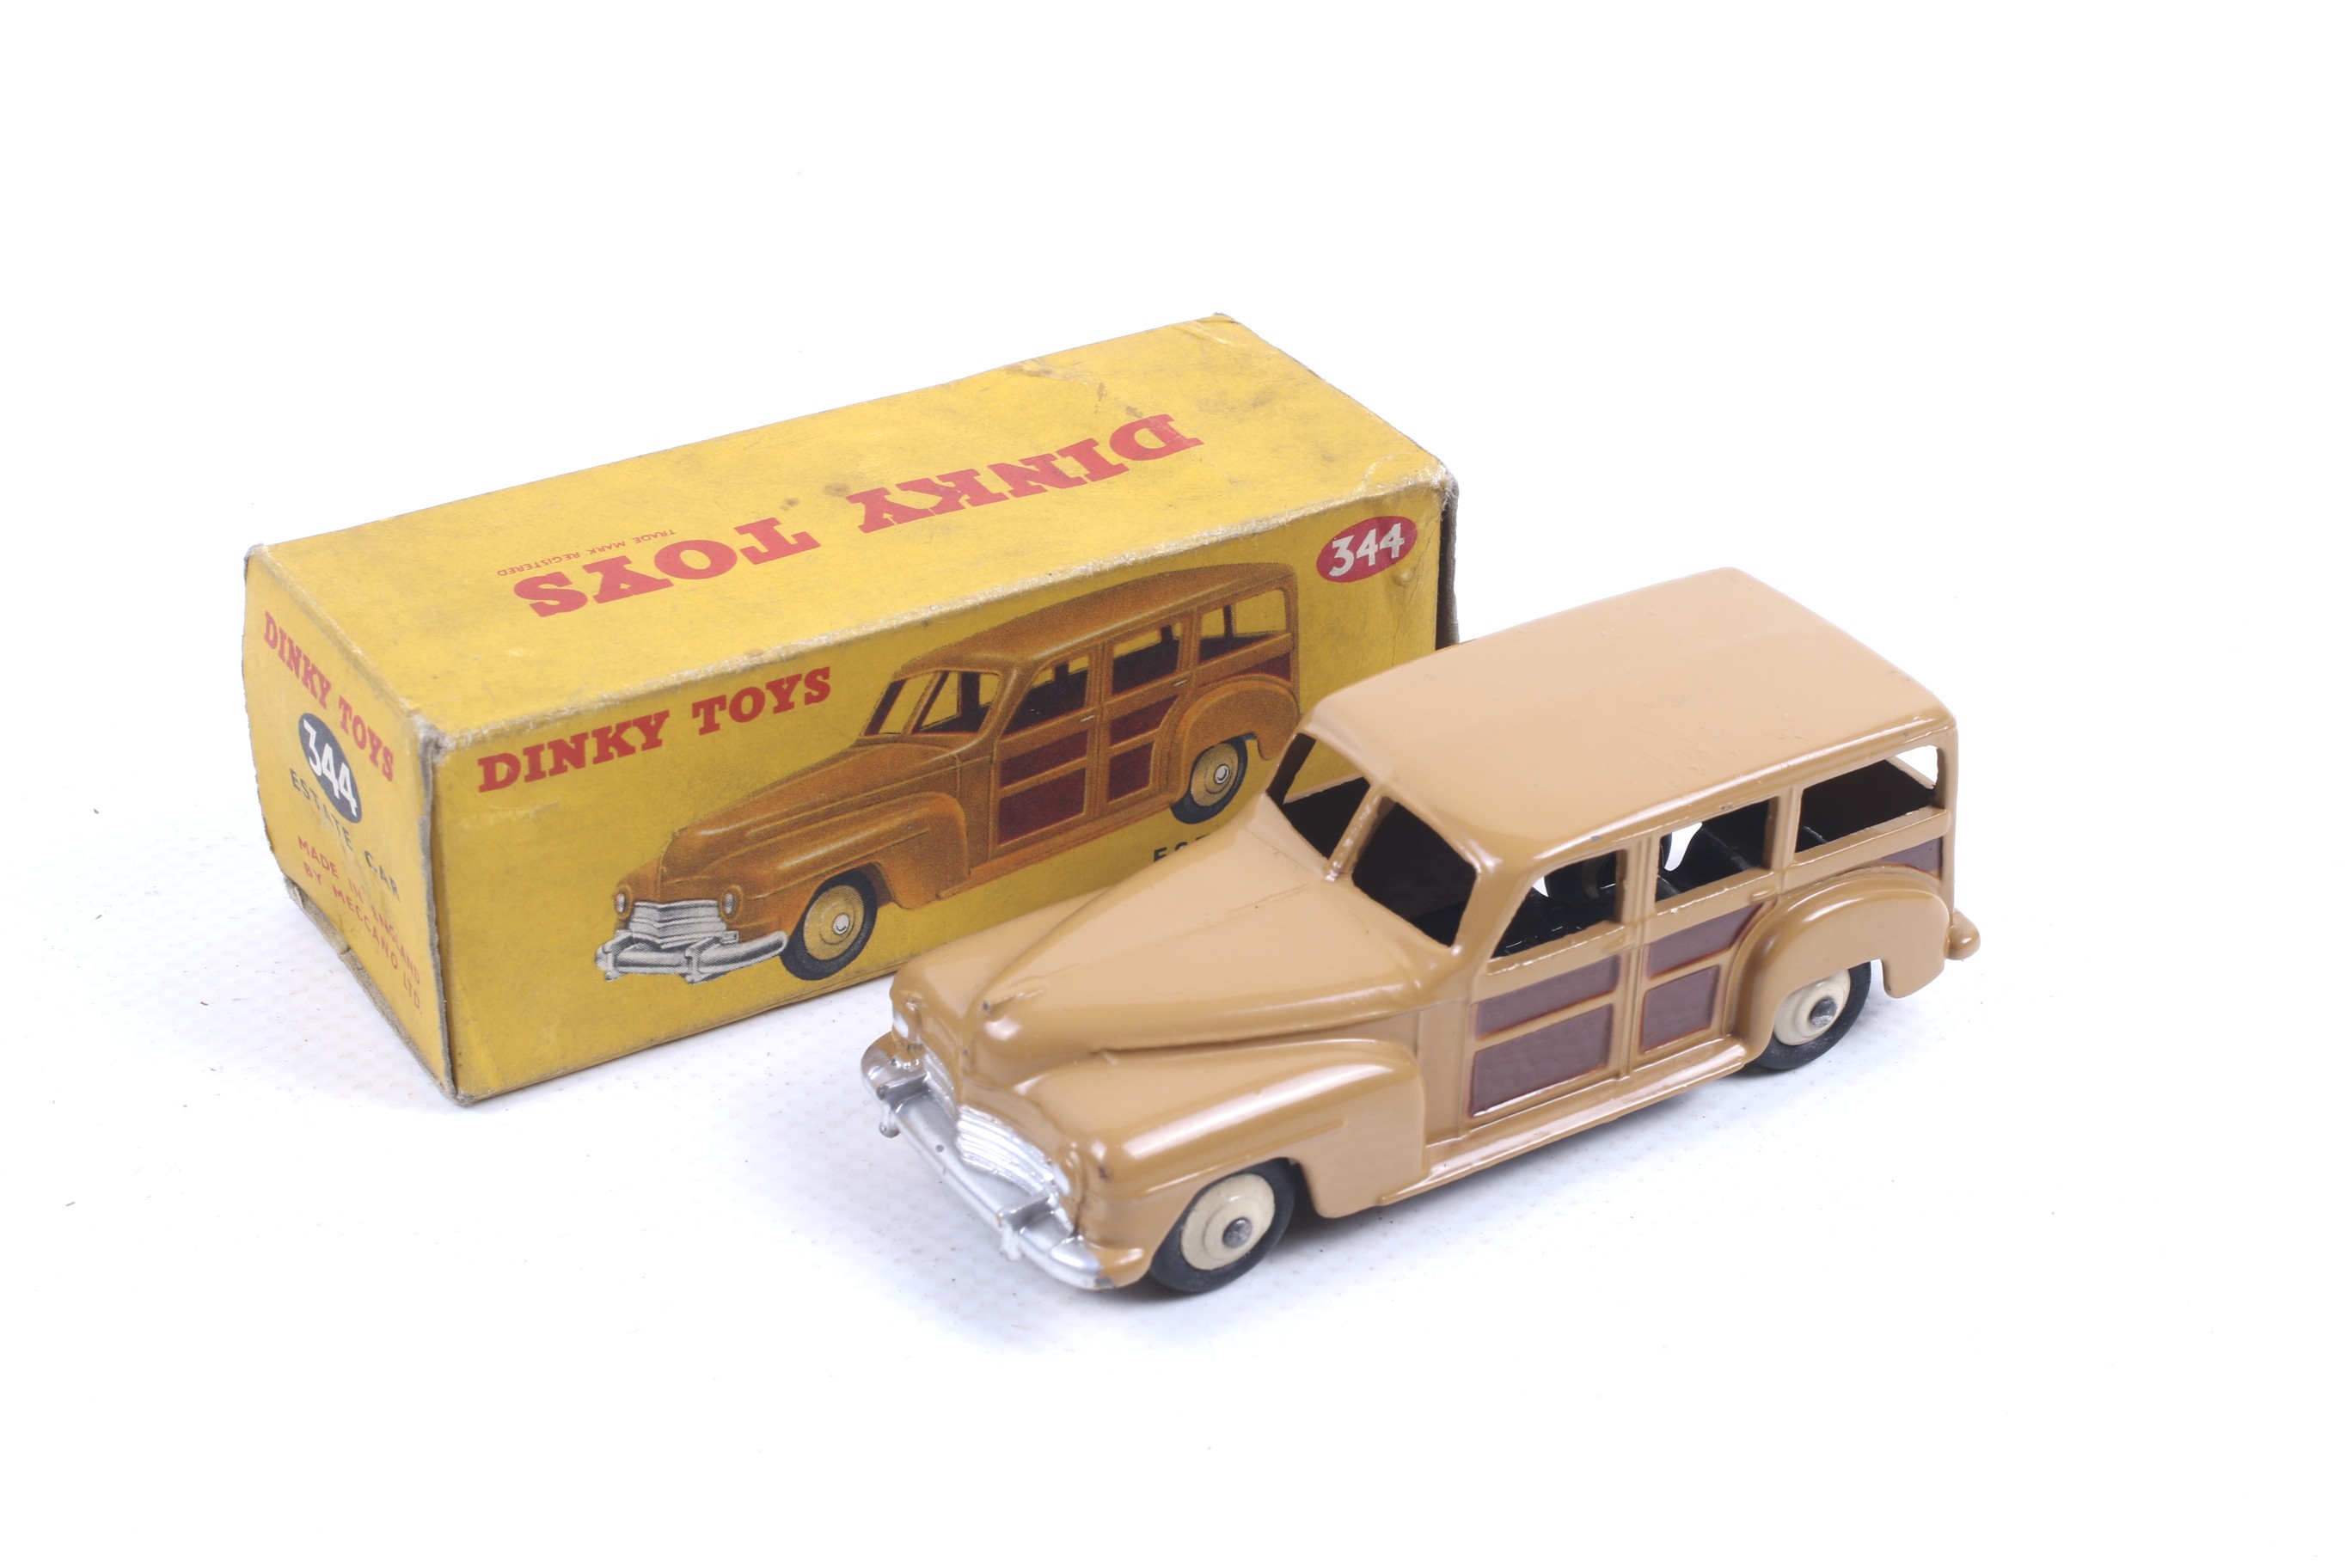 A Dinky diecast Estate Car. No. 344, with a tan and brown body with white wheels, in original box.